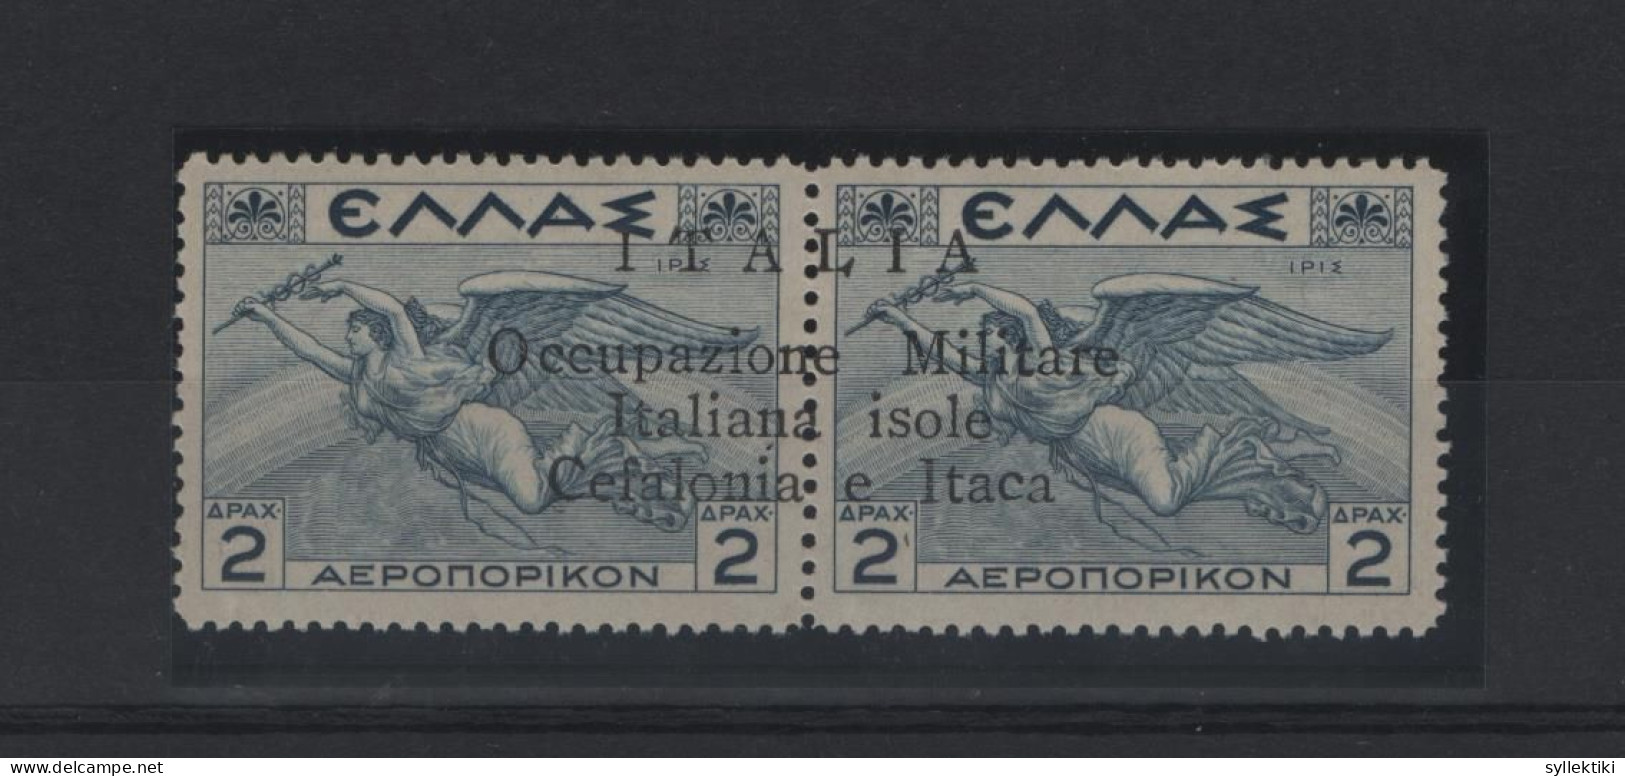 GREECE IONIAN ISLANDS 1941 2 DRACHMAS MNH STAMP IN PAIR MYTHOLOGICAL ISSUE OVERPRINTED  Occupazione Militare Italiana Is - Isole Ioniche